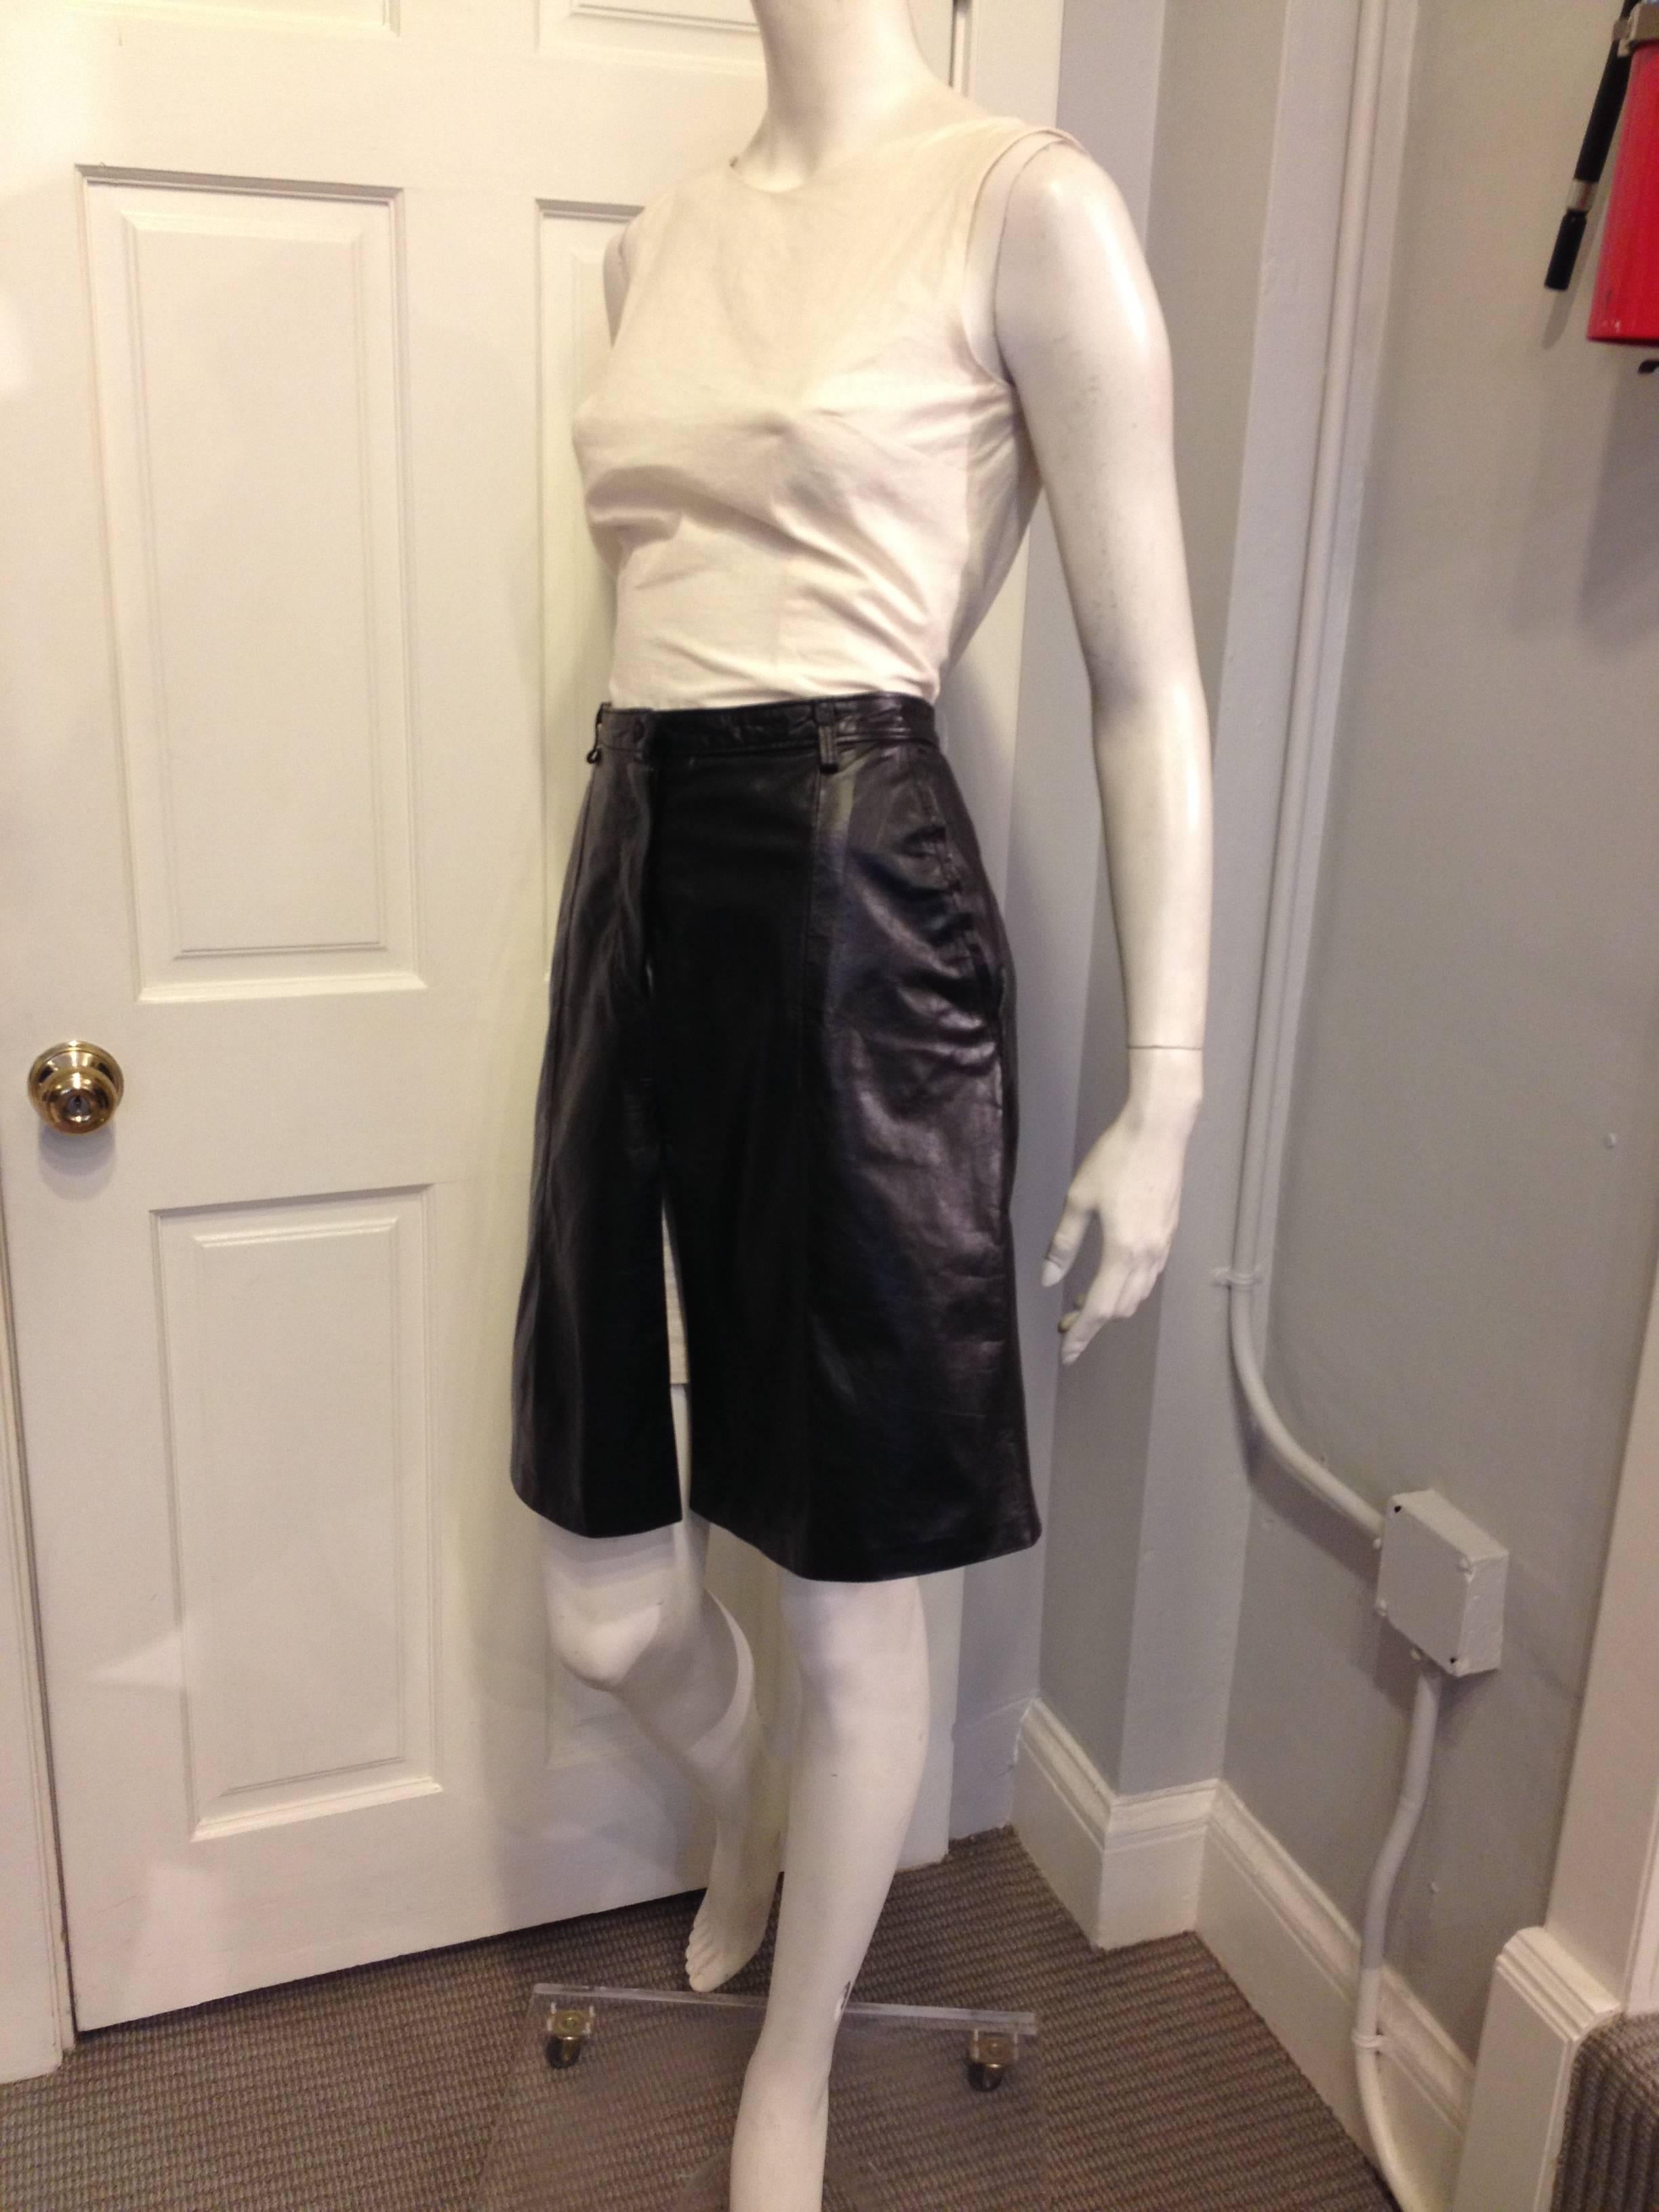 Tough, cool, and feminine all at once, this skirt by Ann Demeulemeester is effortless. The waistline sits high to accentuate the a-line silhouette, and the front is slit several inches high from the hemline. This piece is rock and roll and beautiful